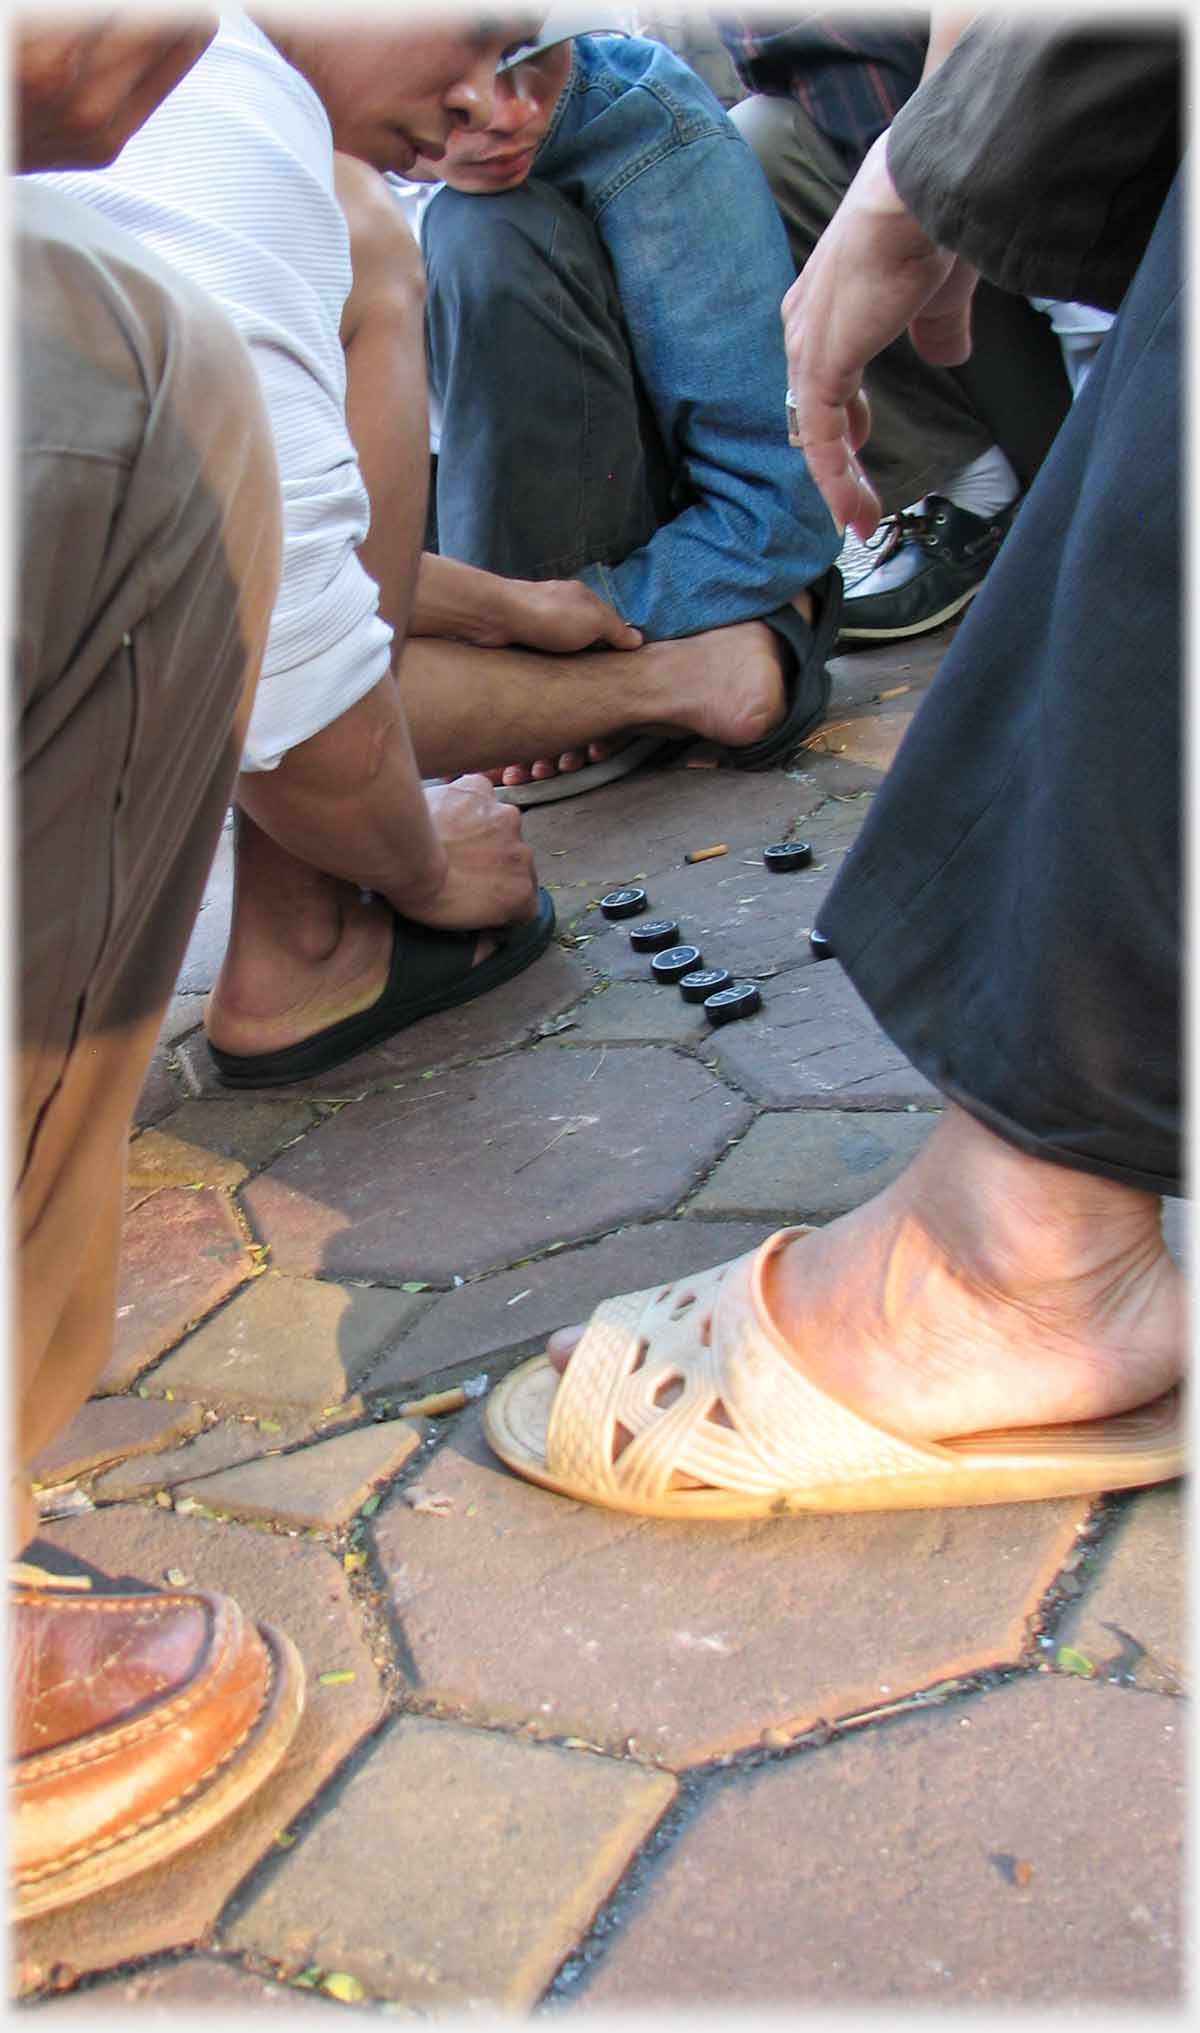 Chess pieces on paving stones between feet.